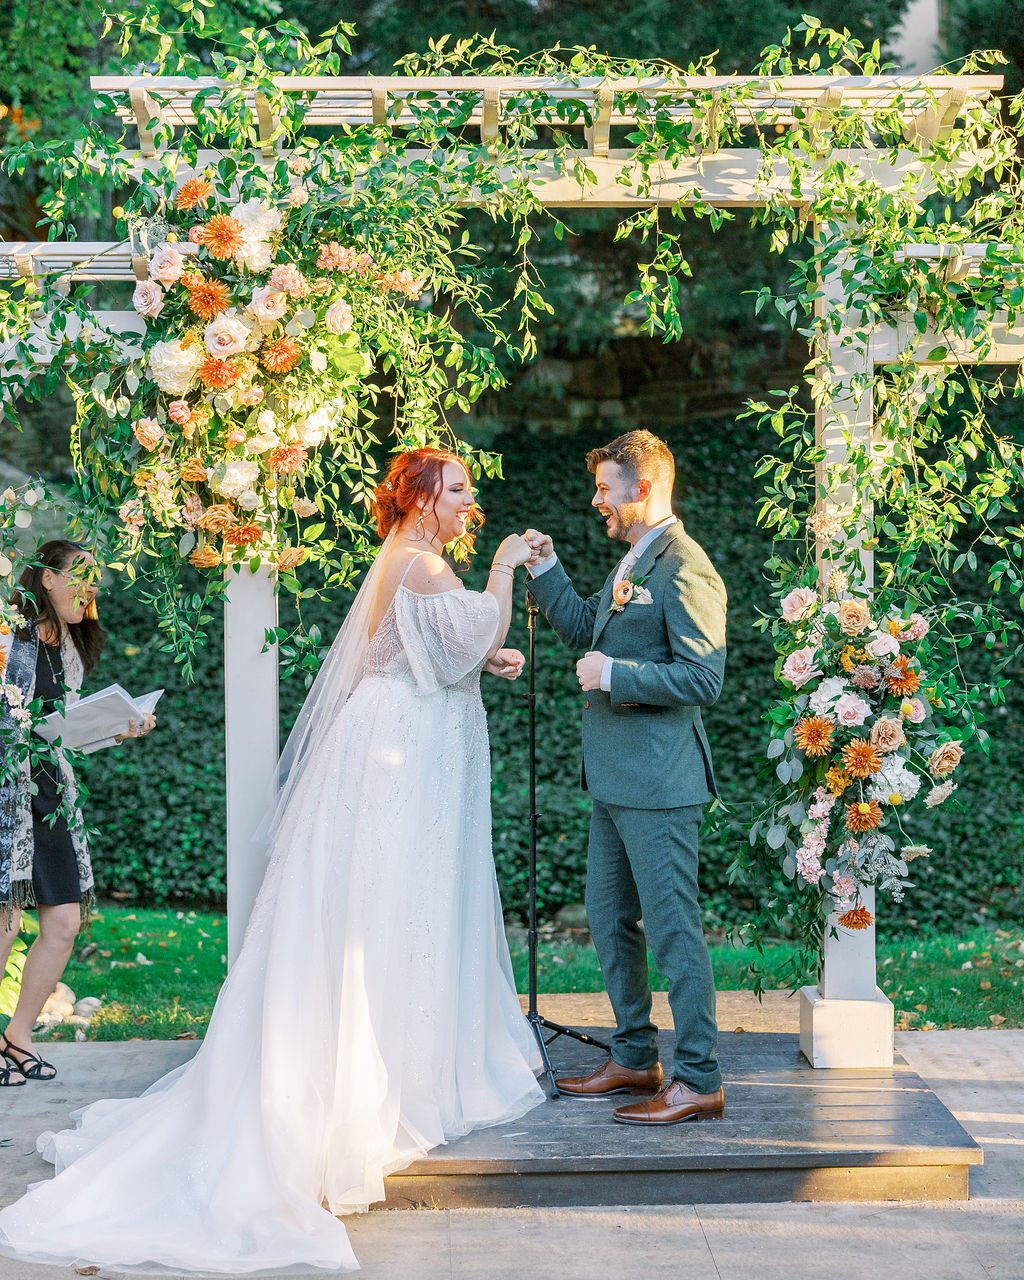 Shannon and Chris' Art Inspired Wedding at Pomme Radnor